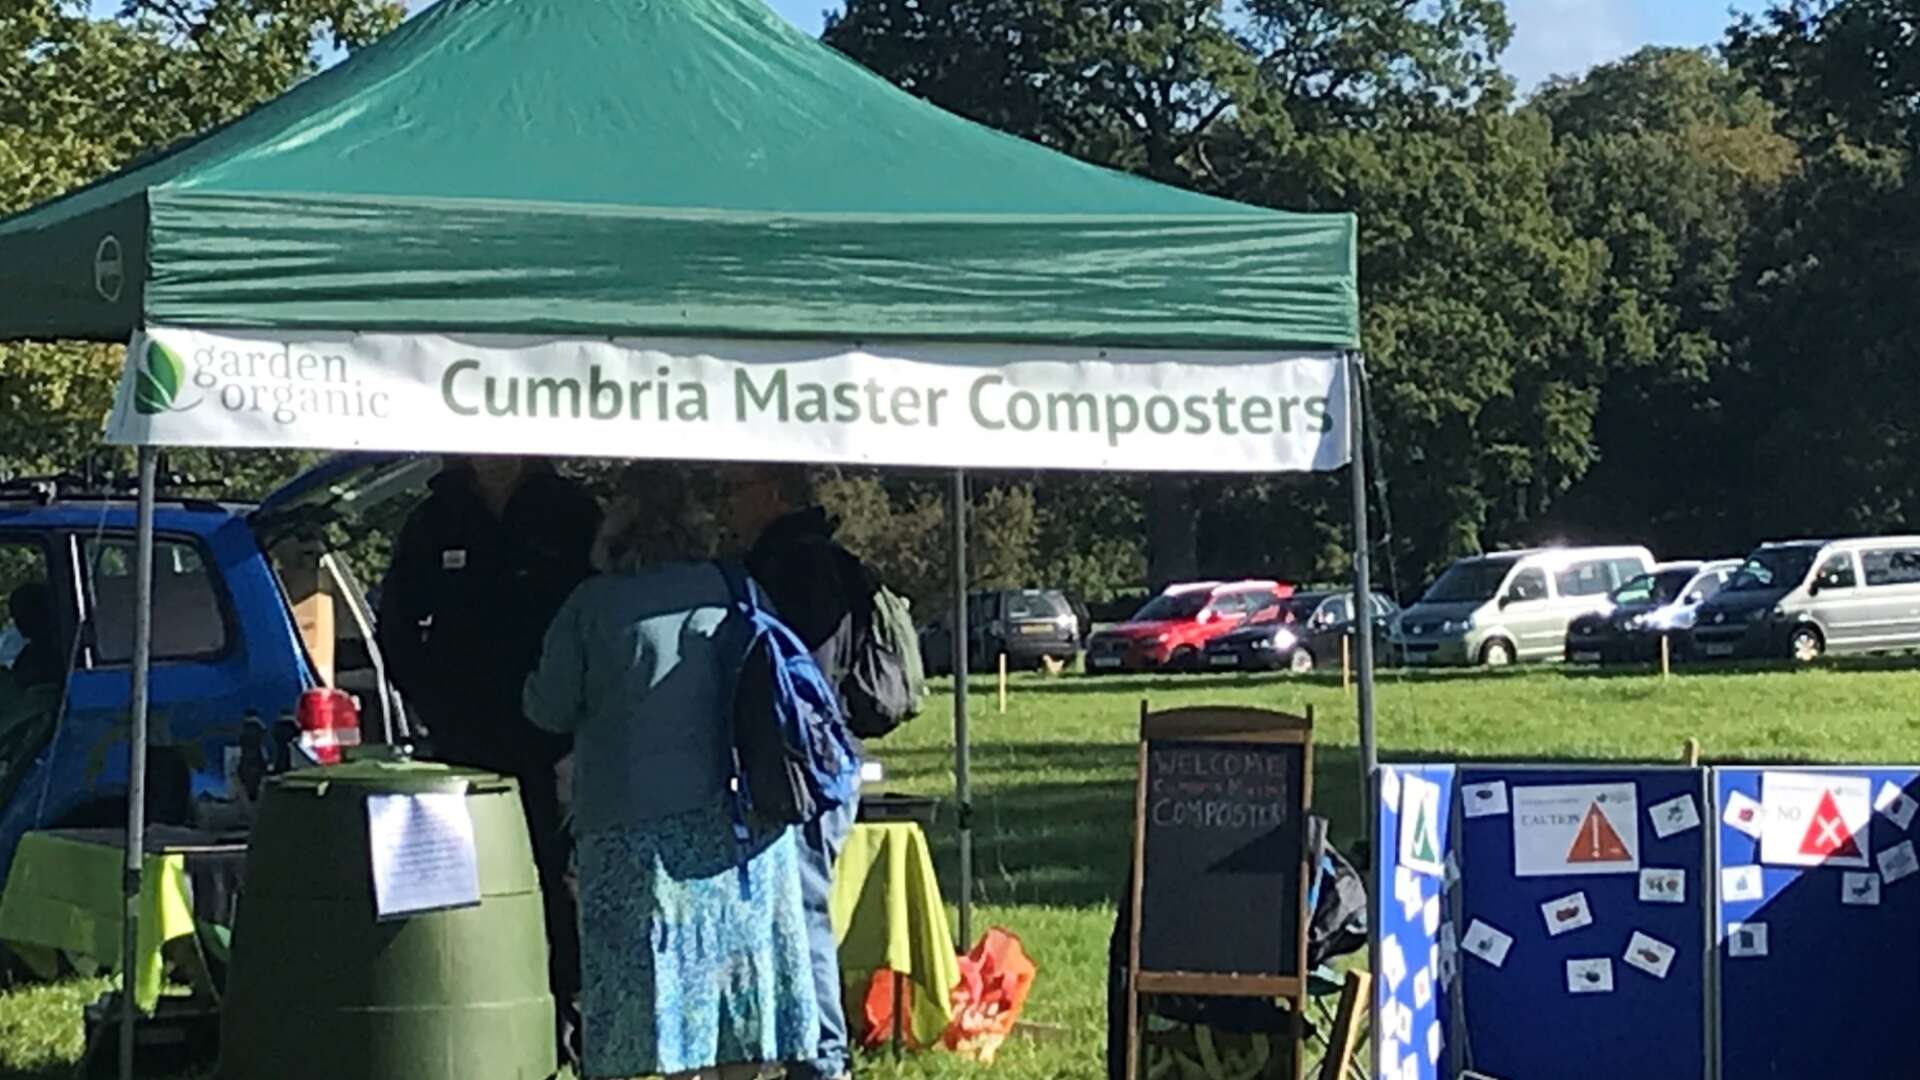 Master Composters stand at apple day event